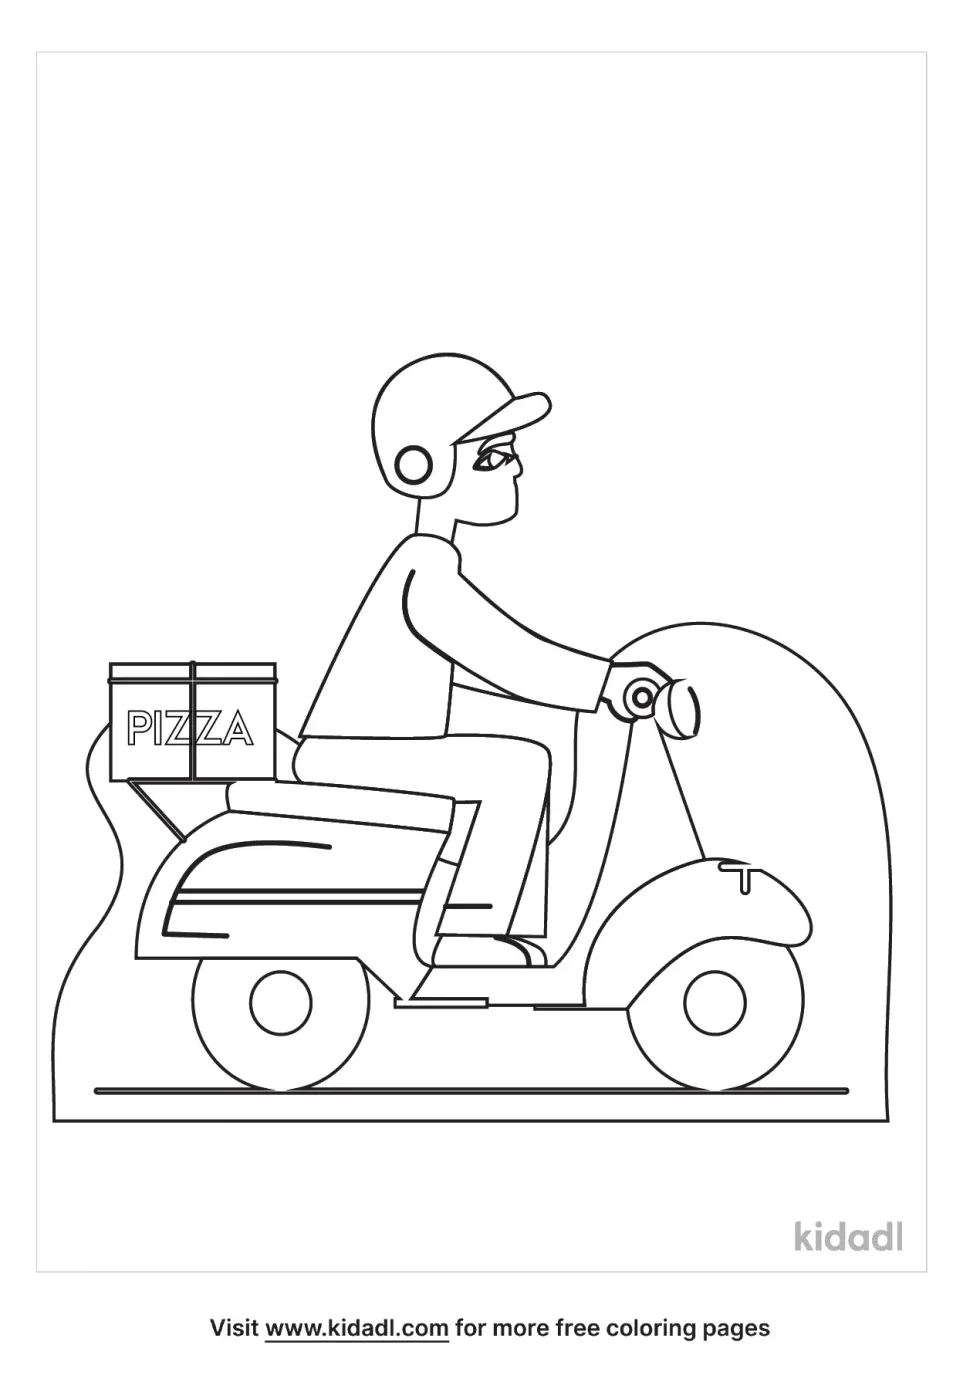 Italian Pizza Man On Scooter Coloring Page